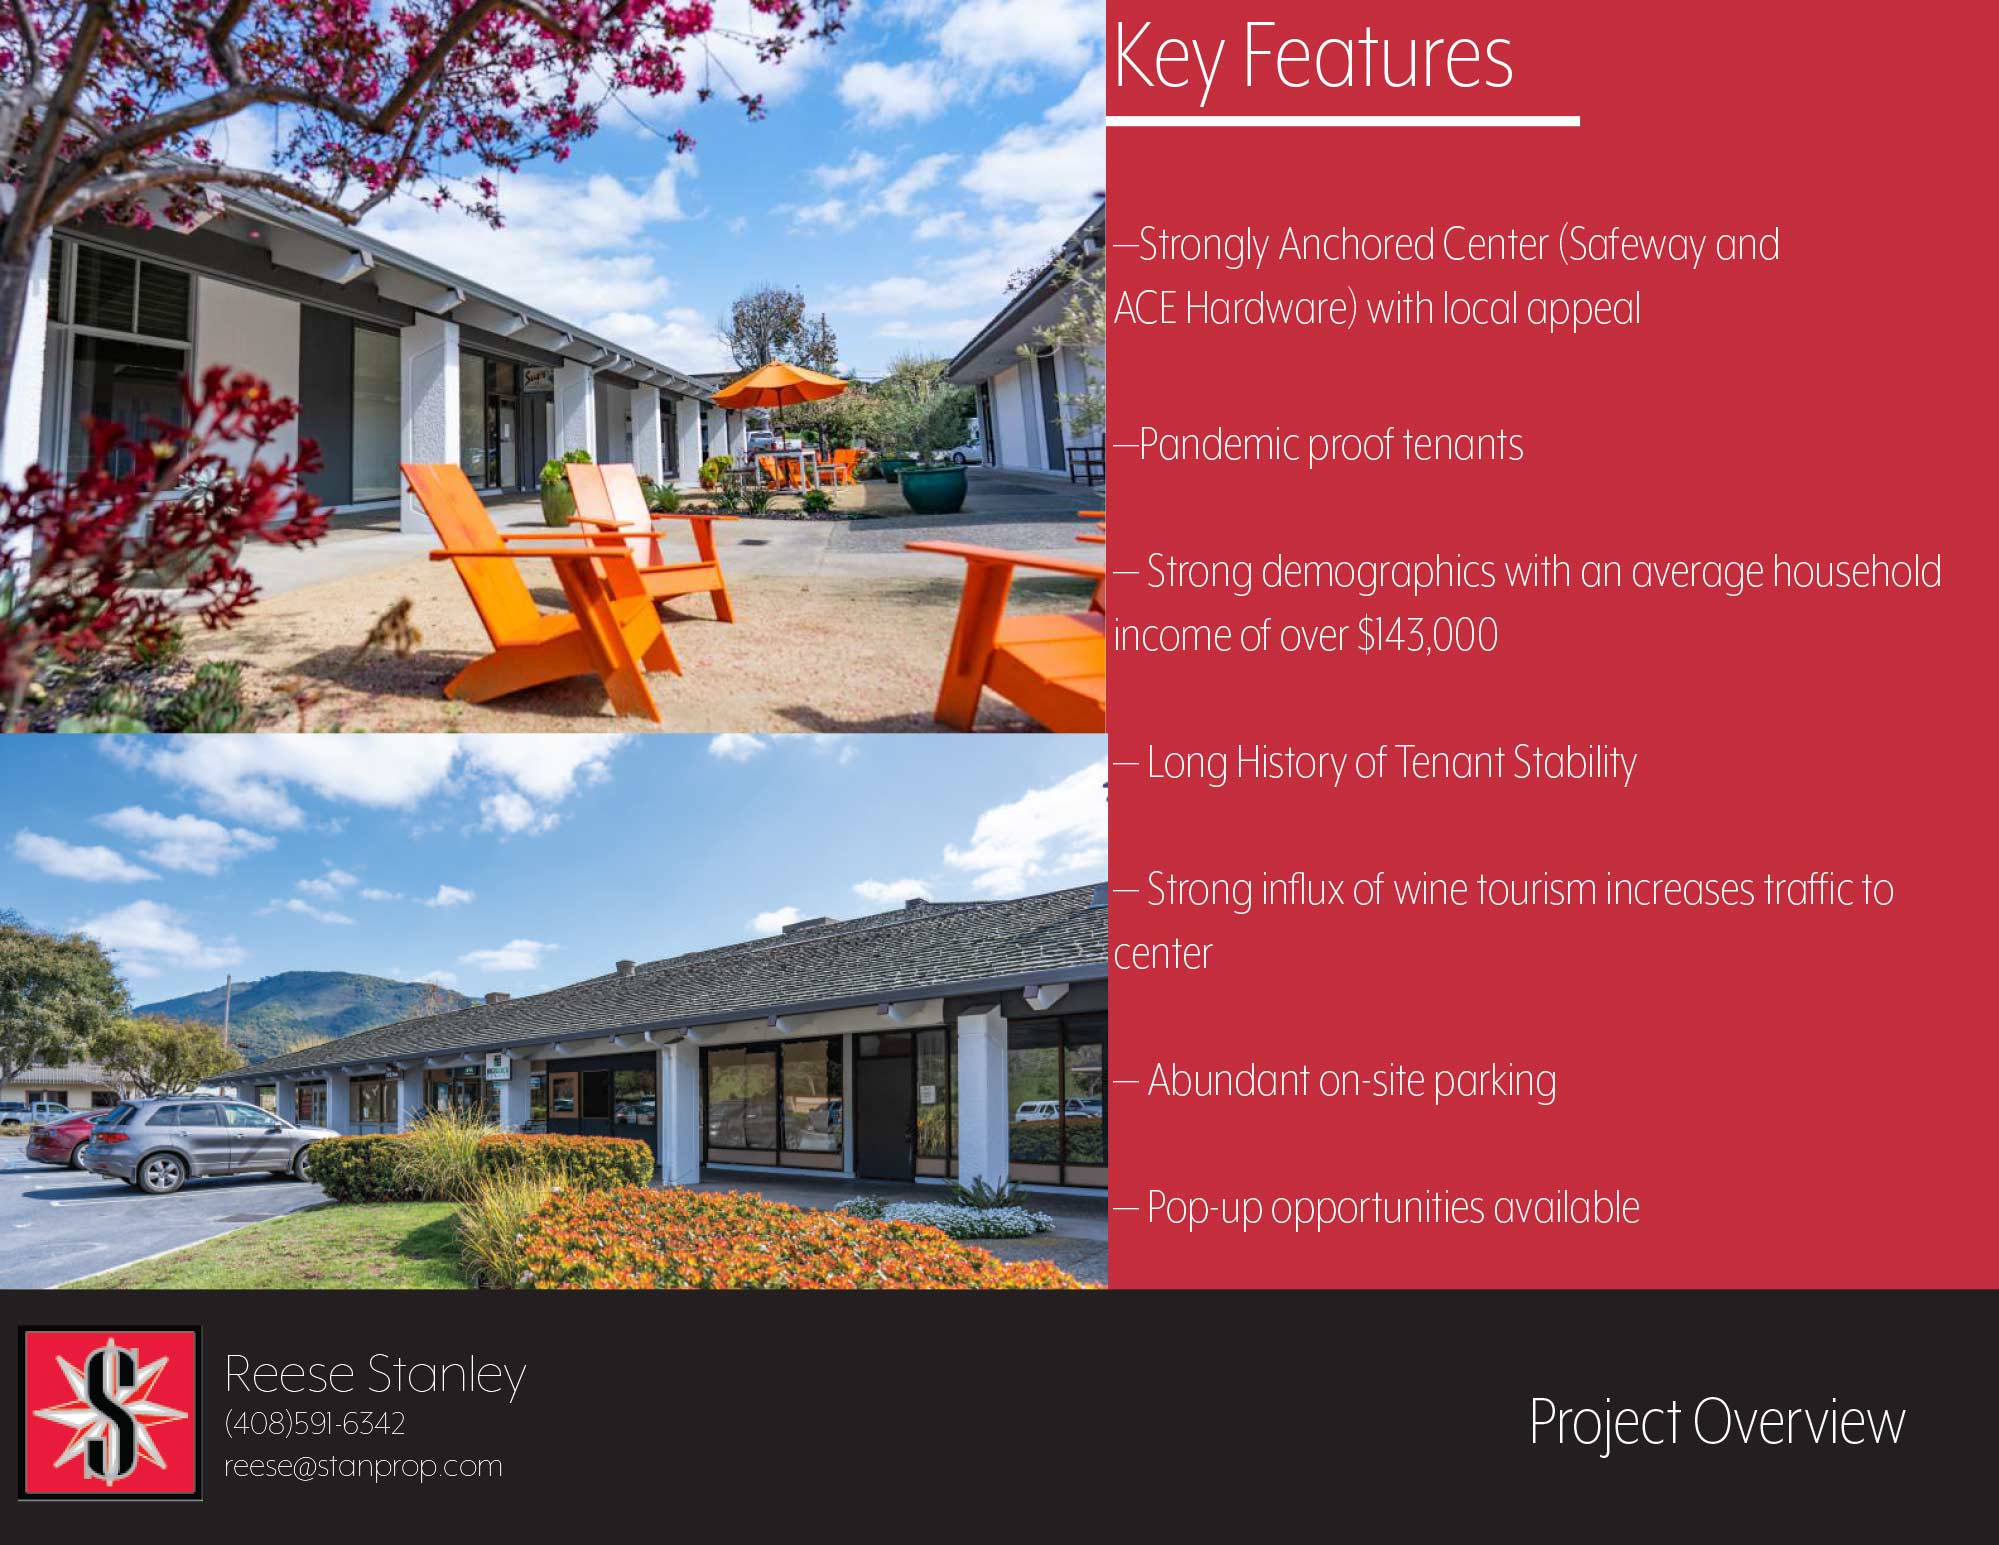 marketplace at carmel valley leasing brochure